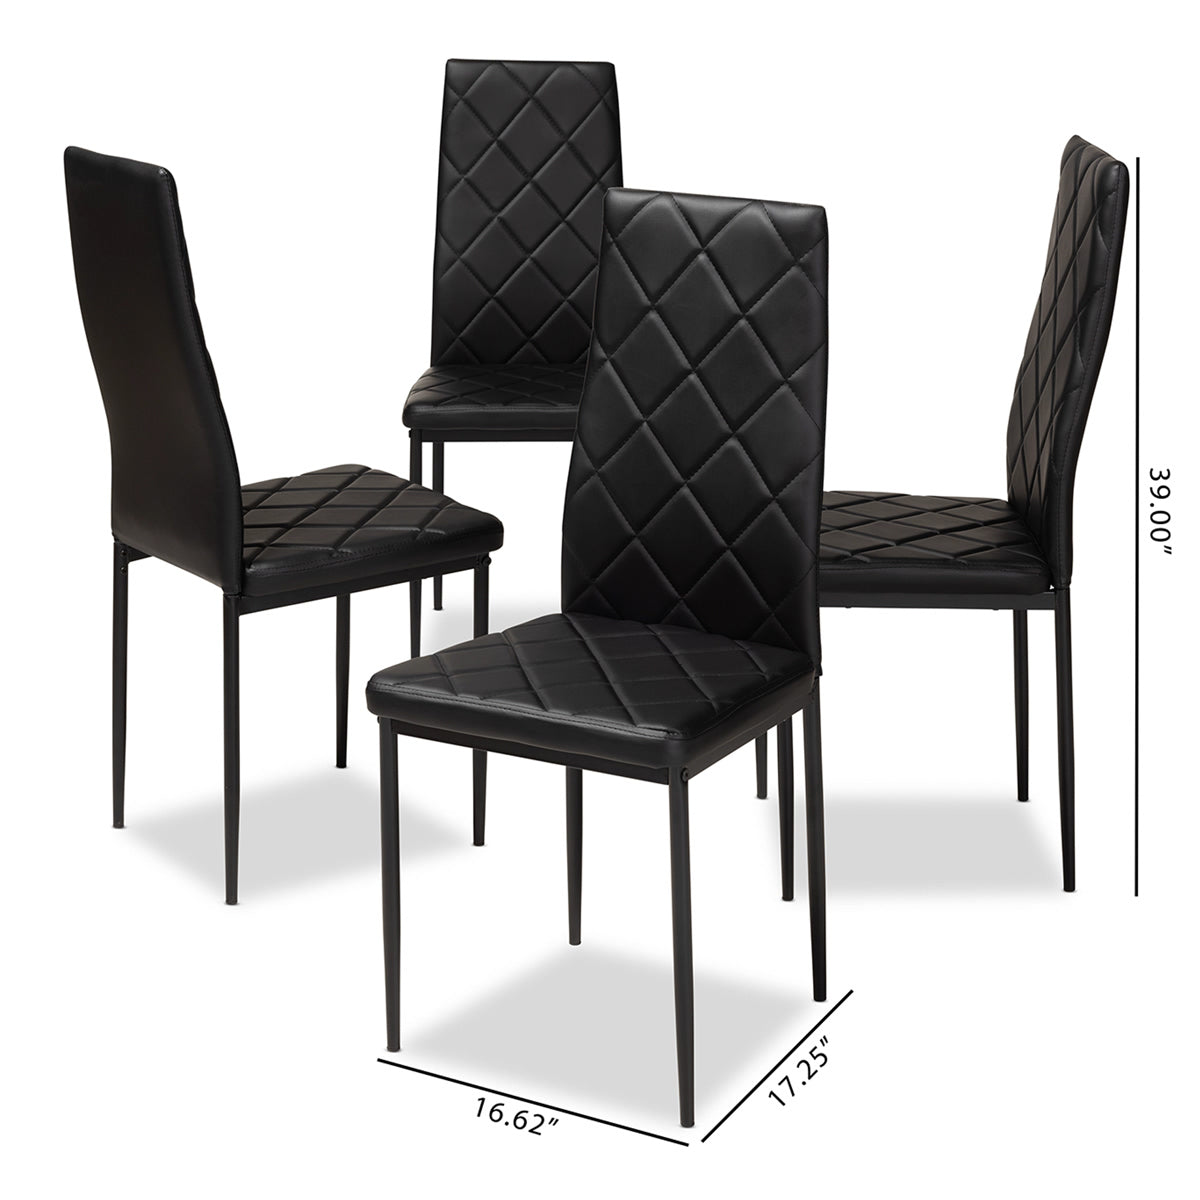 Baxton Studio Blaise Modern and Contemporary Black Faux Leather Upholstered Dining Chair (Set of 4) Baxton Studio-dining chair-Minimal And Modern - 5